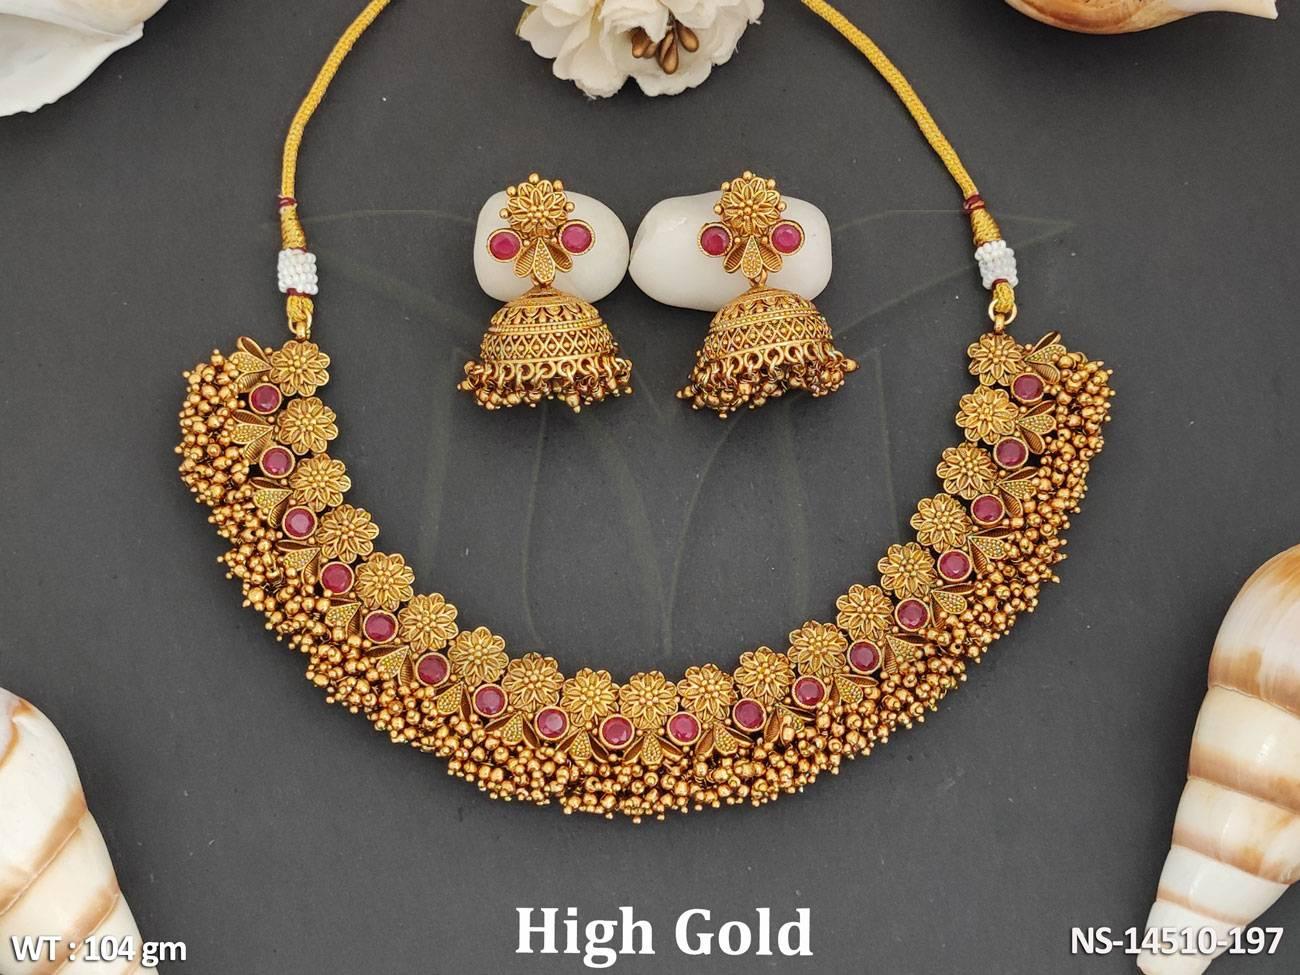 This antique jewellery set features high gold polish and stunning full stone embellishments, perfect for adding glamour to any party outfit.